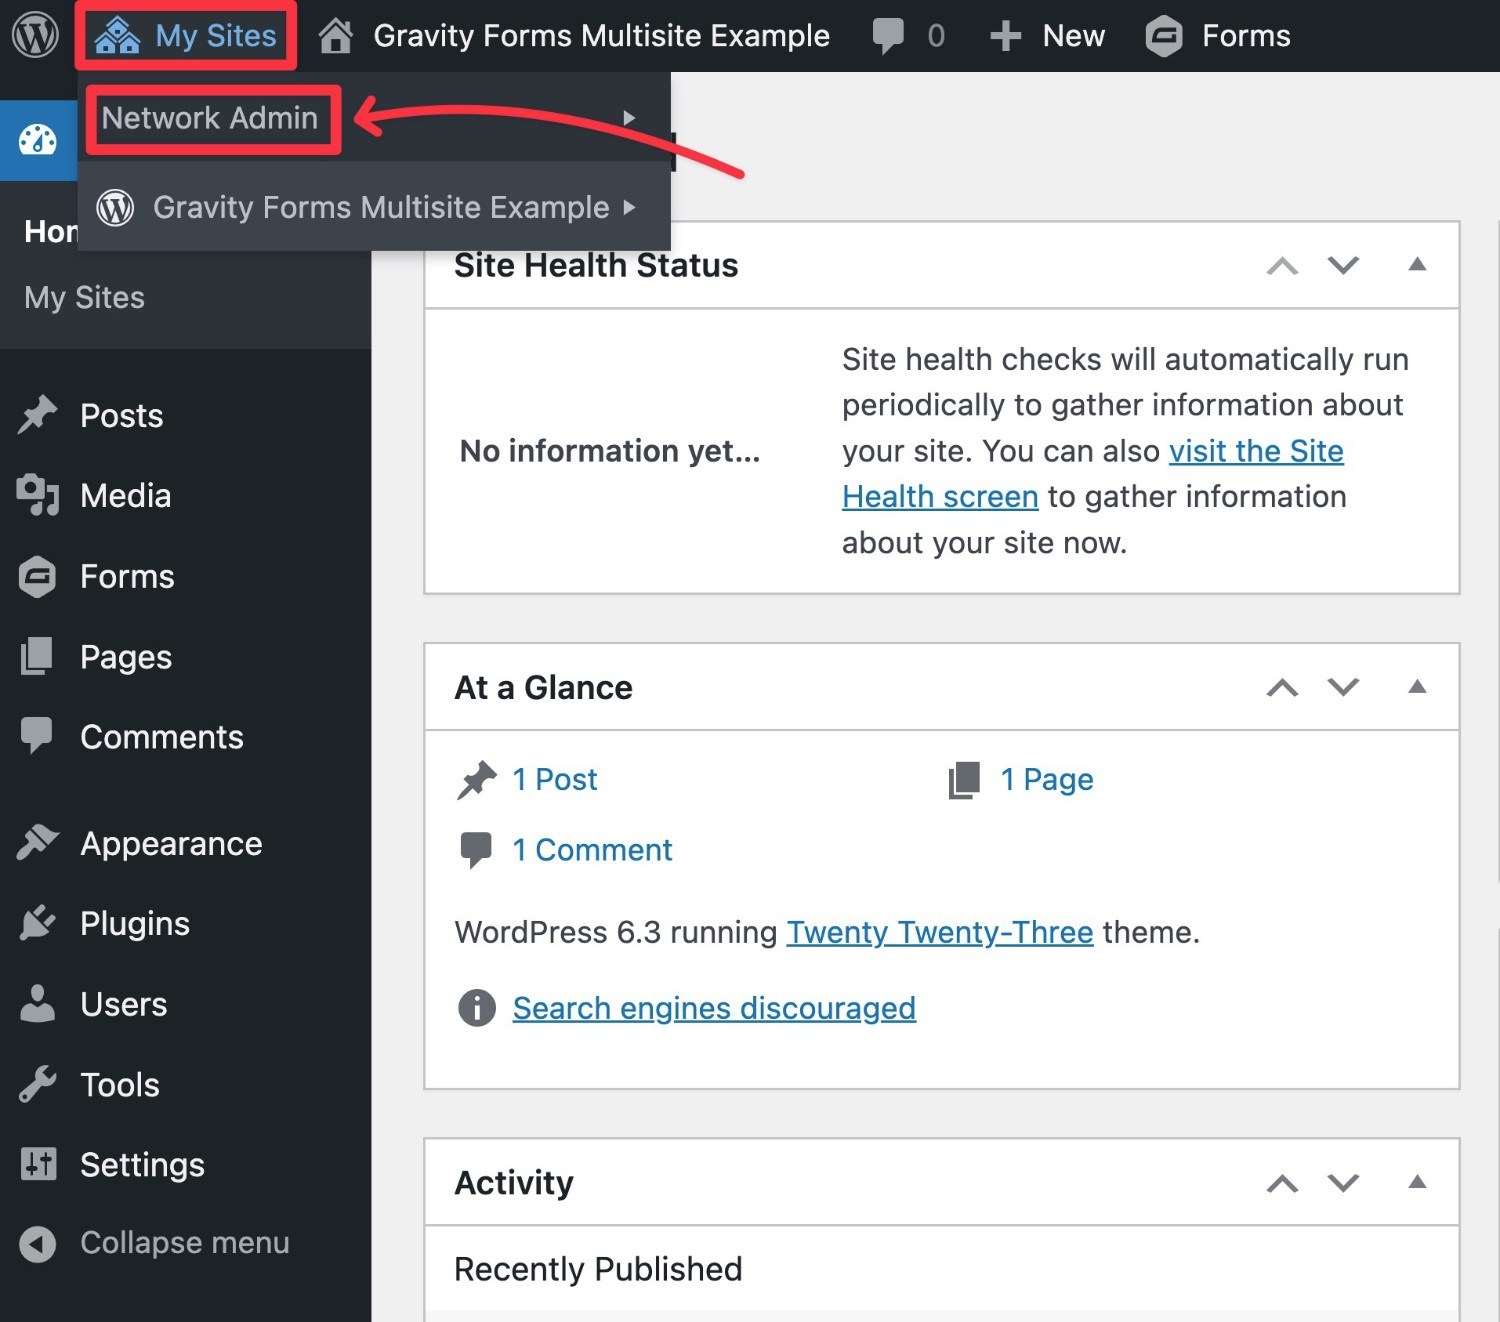 How to access the WordPress multisite network admin